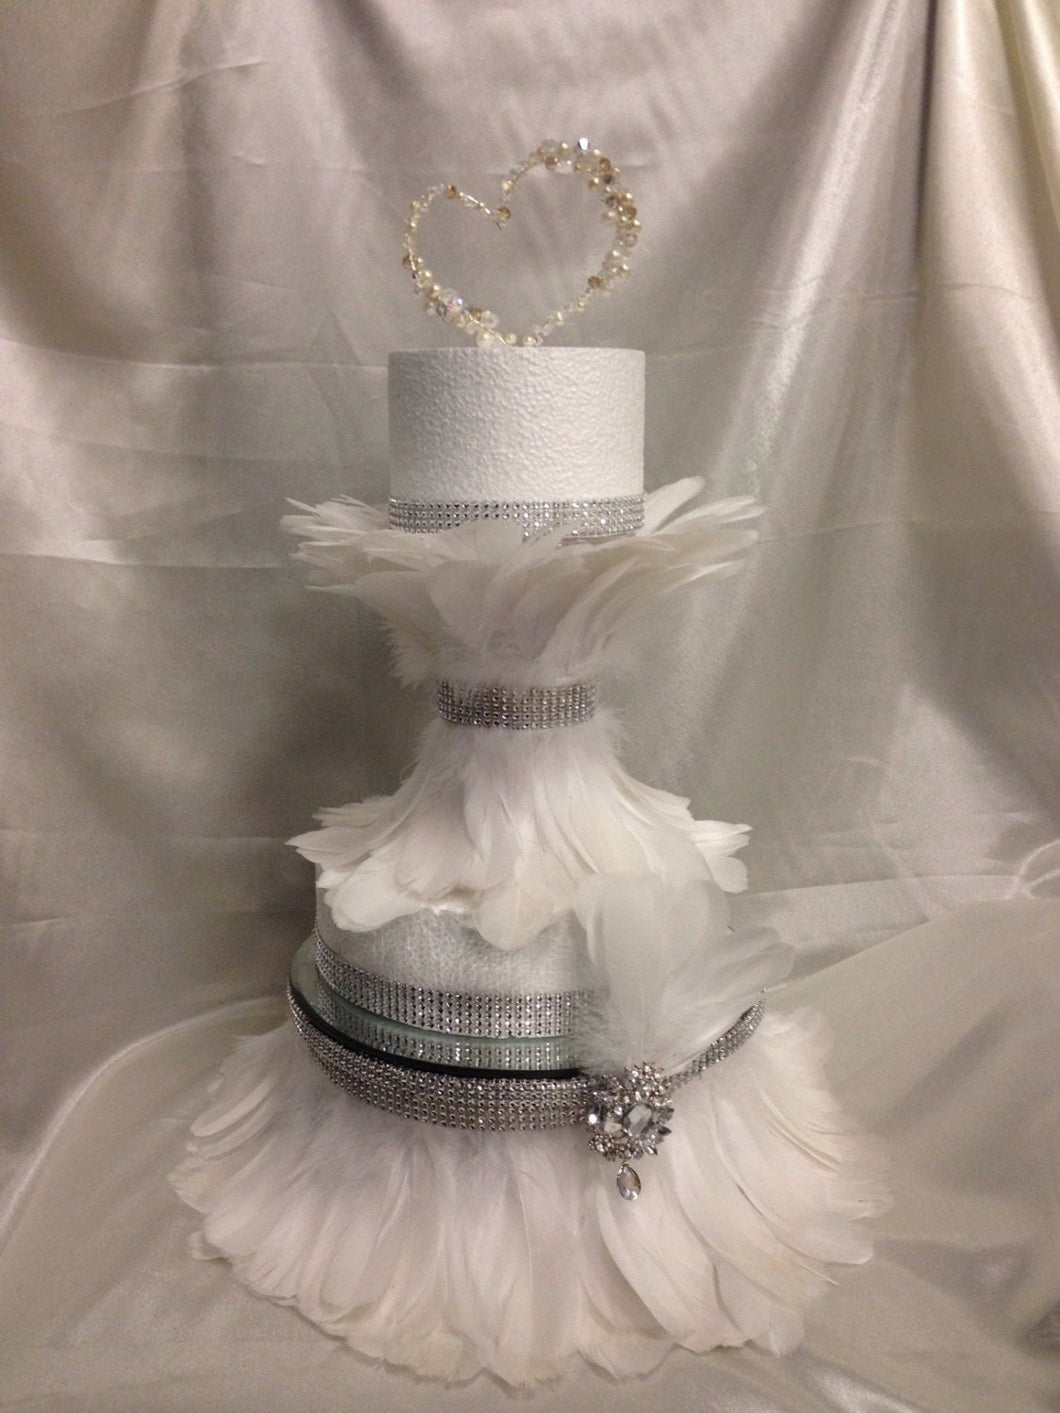 Feather wedding cake stand + divider , set of 2 by Crystal wedding uk